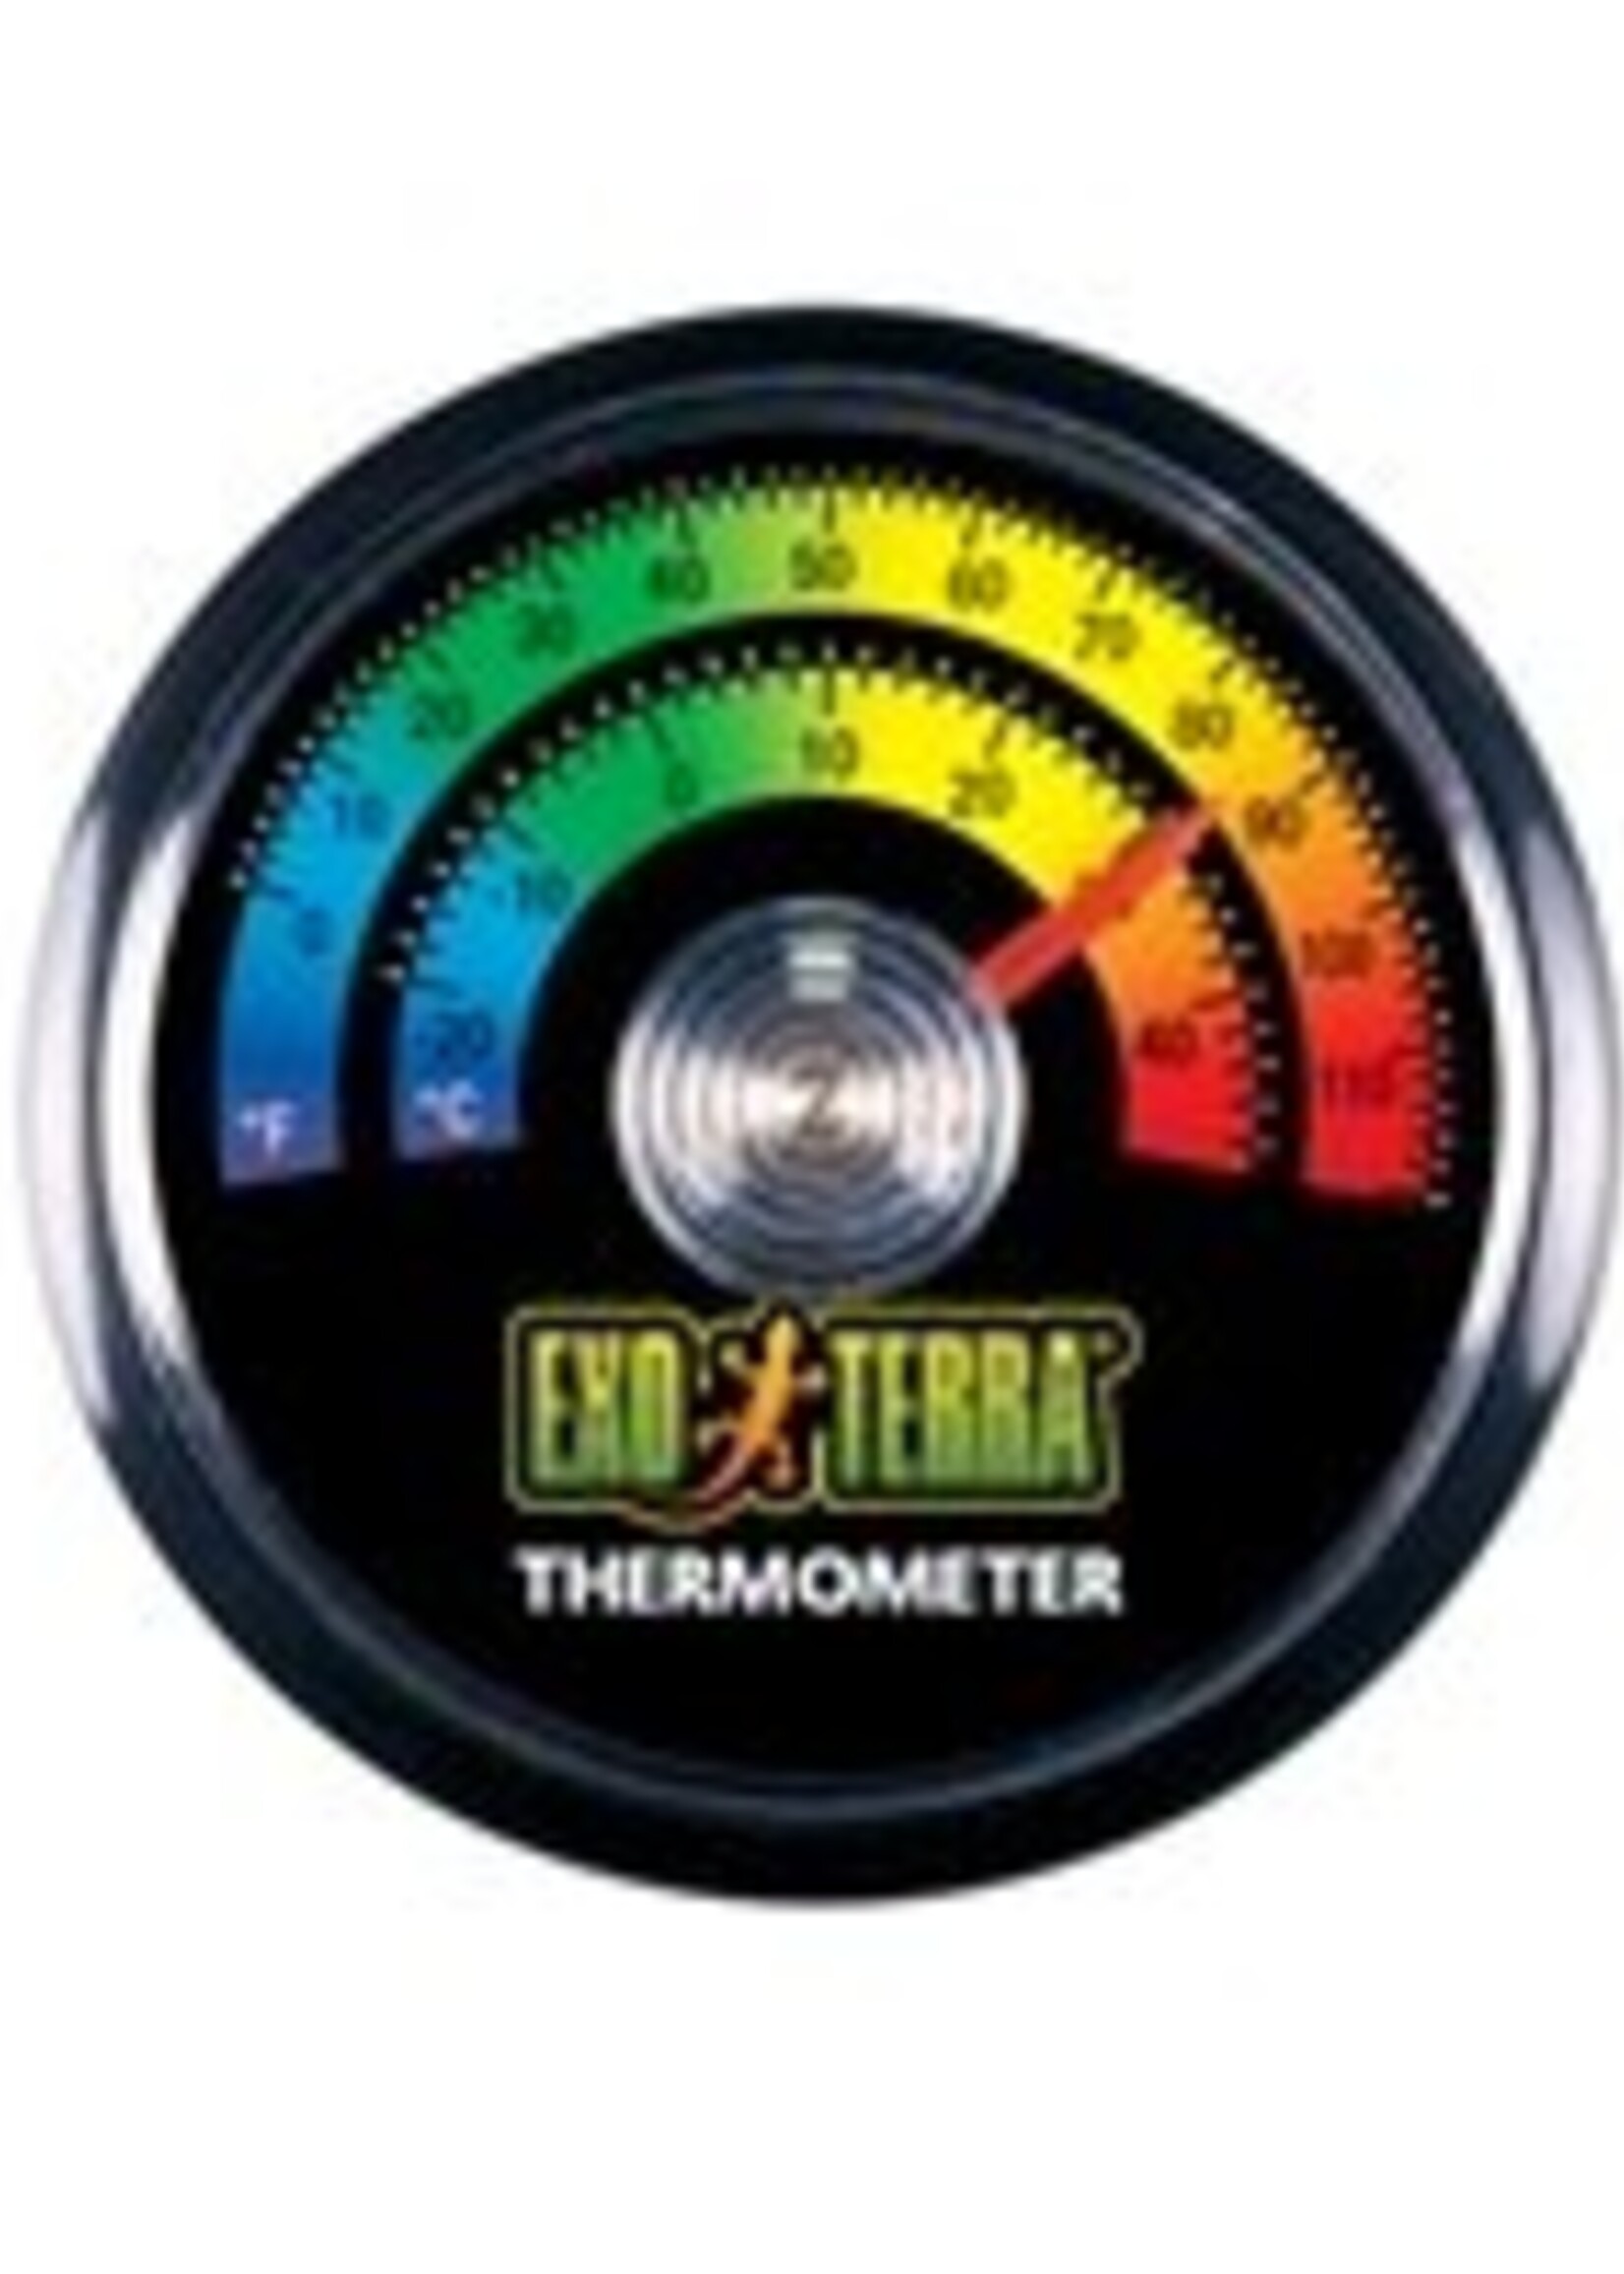 Exo Terra Thermometer, C&F